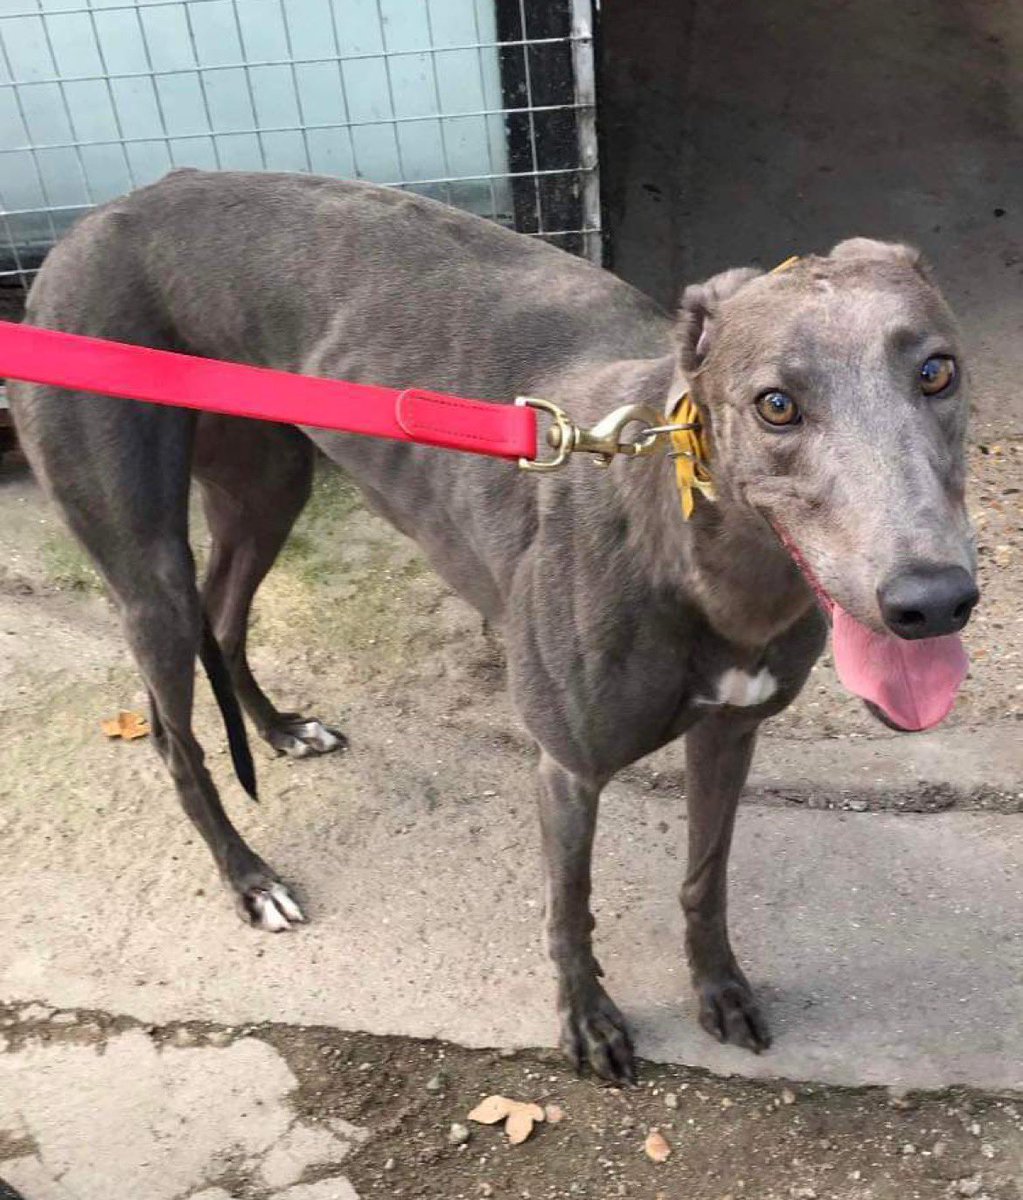 Meet beautiful Heels, this pretty little blue girl is just 2 years old and now retired. 
She is a happy friendly little soul who likes nothing but fuss and cuddles. 
She would suit any family situation to meet her call 07852 734958 #retiredgreyhounds #greyhoundsmakegreatpets